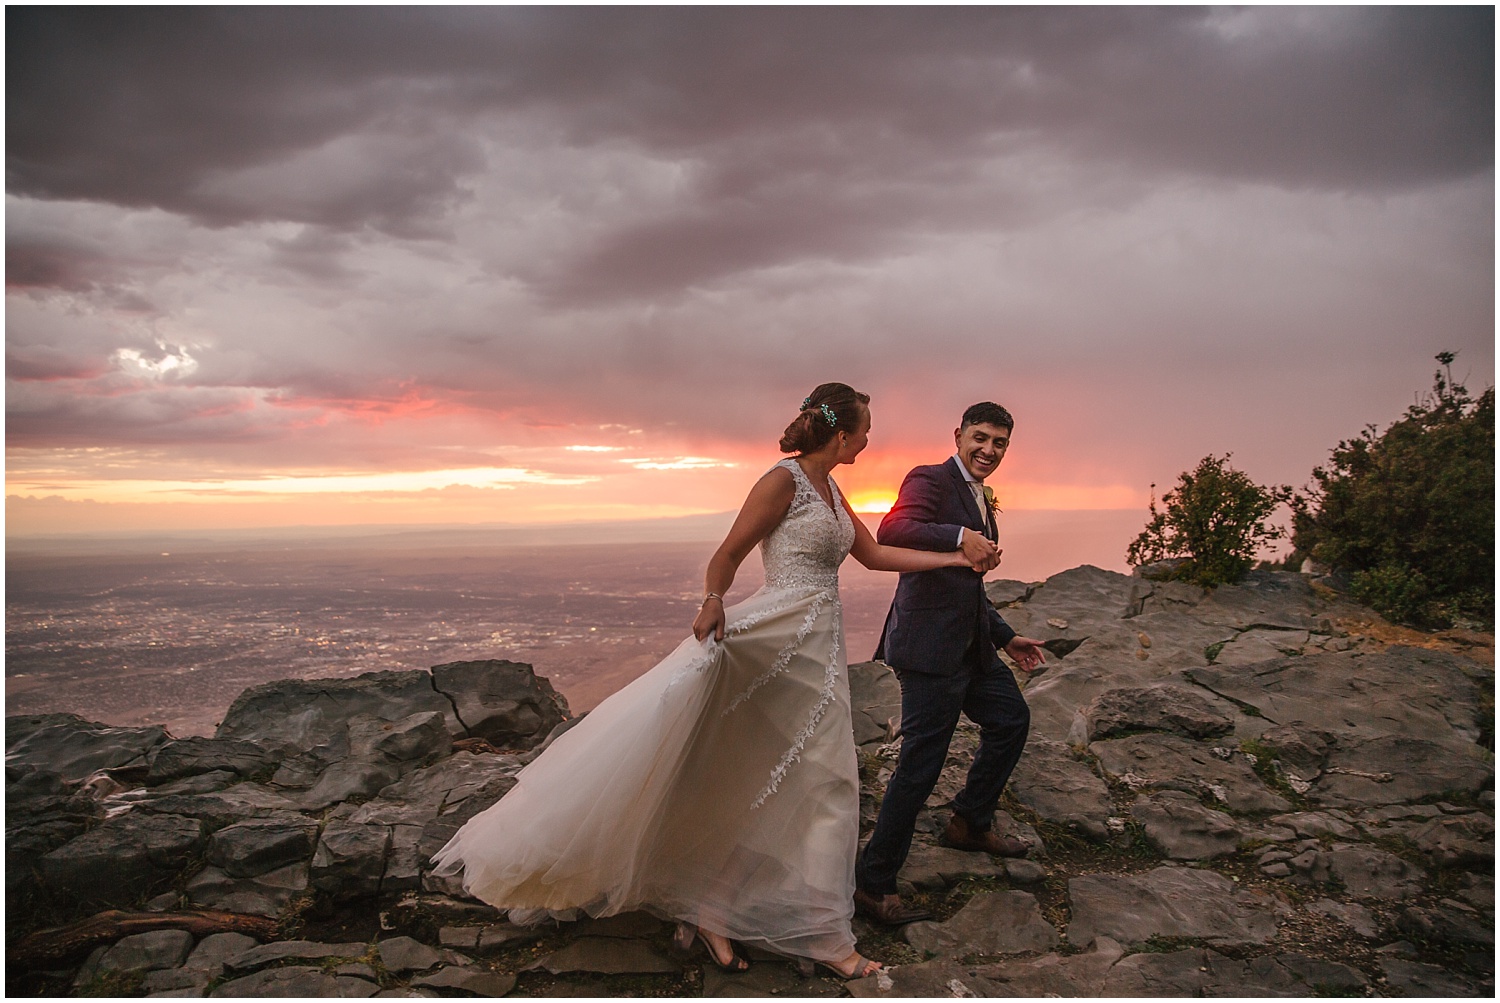 Groom leads bride up the rocks at Sandia Crest as the sun sets behind